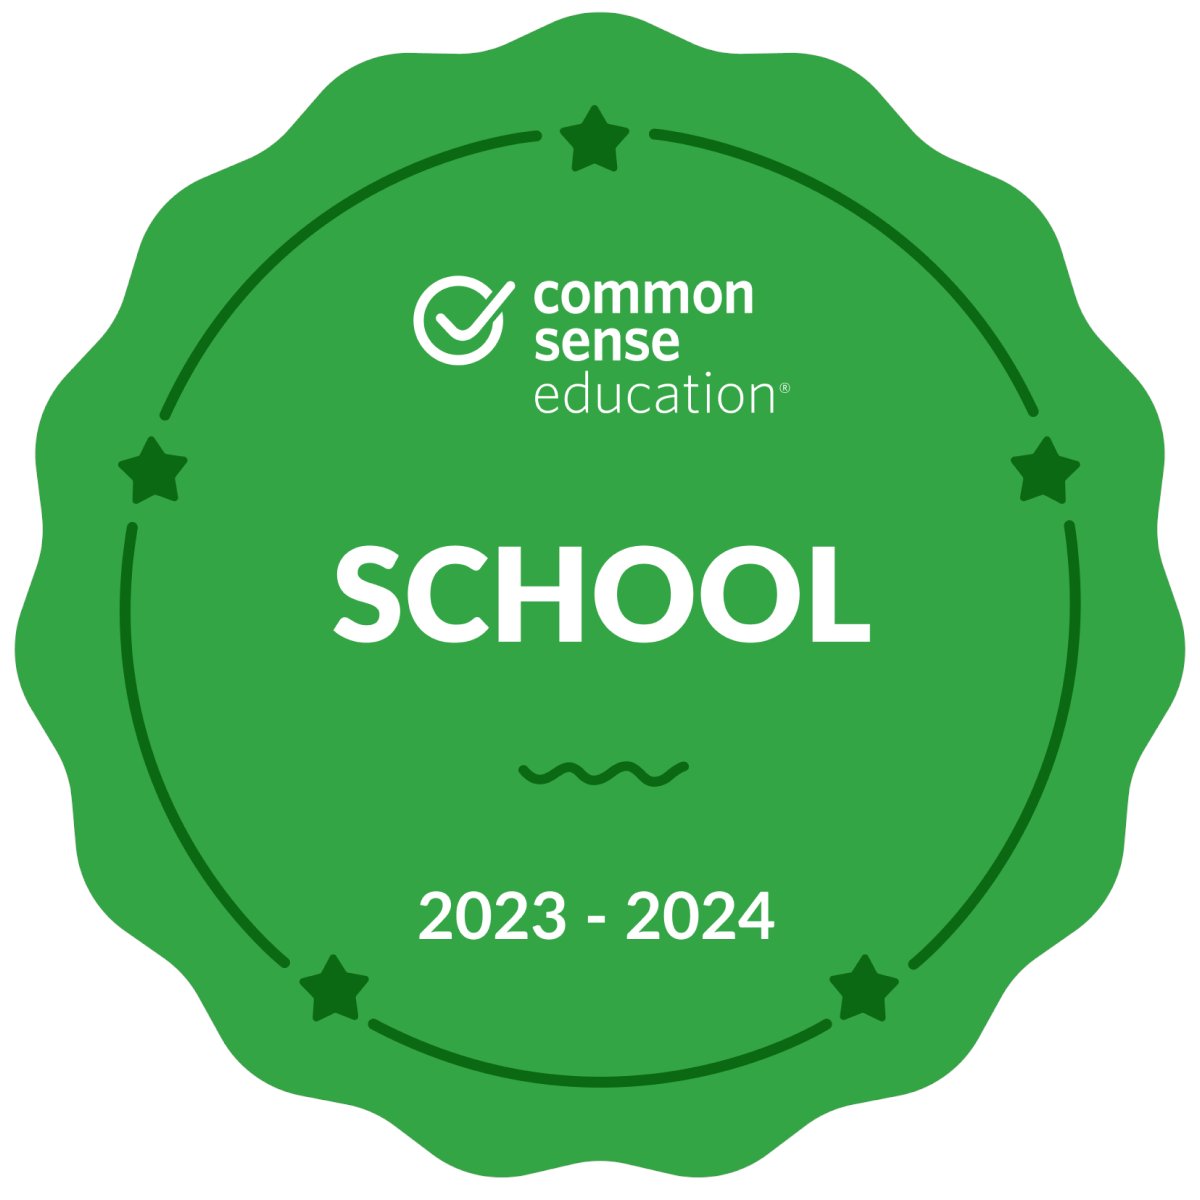 FLA is officially a #CommonSenseSchool!  @CommonSenseEd